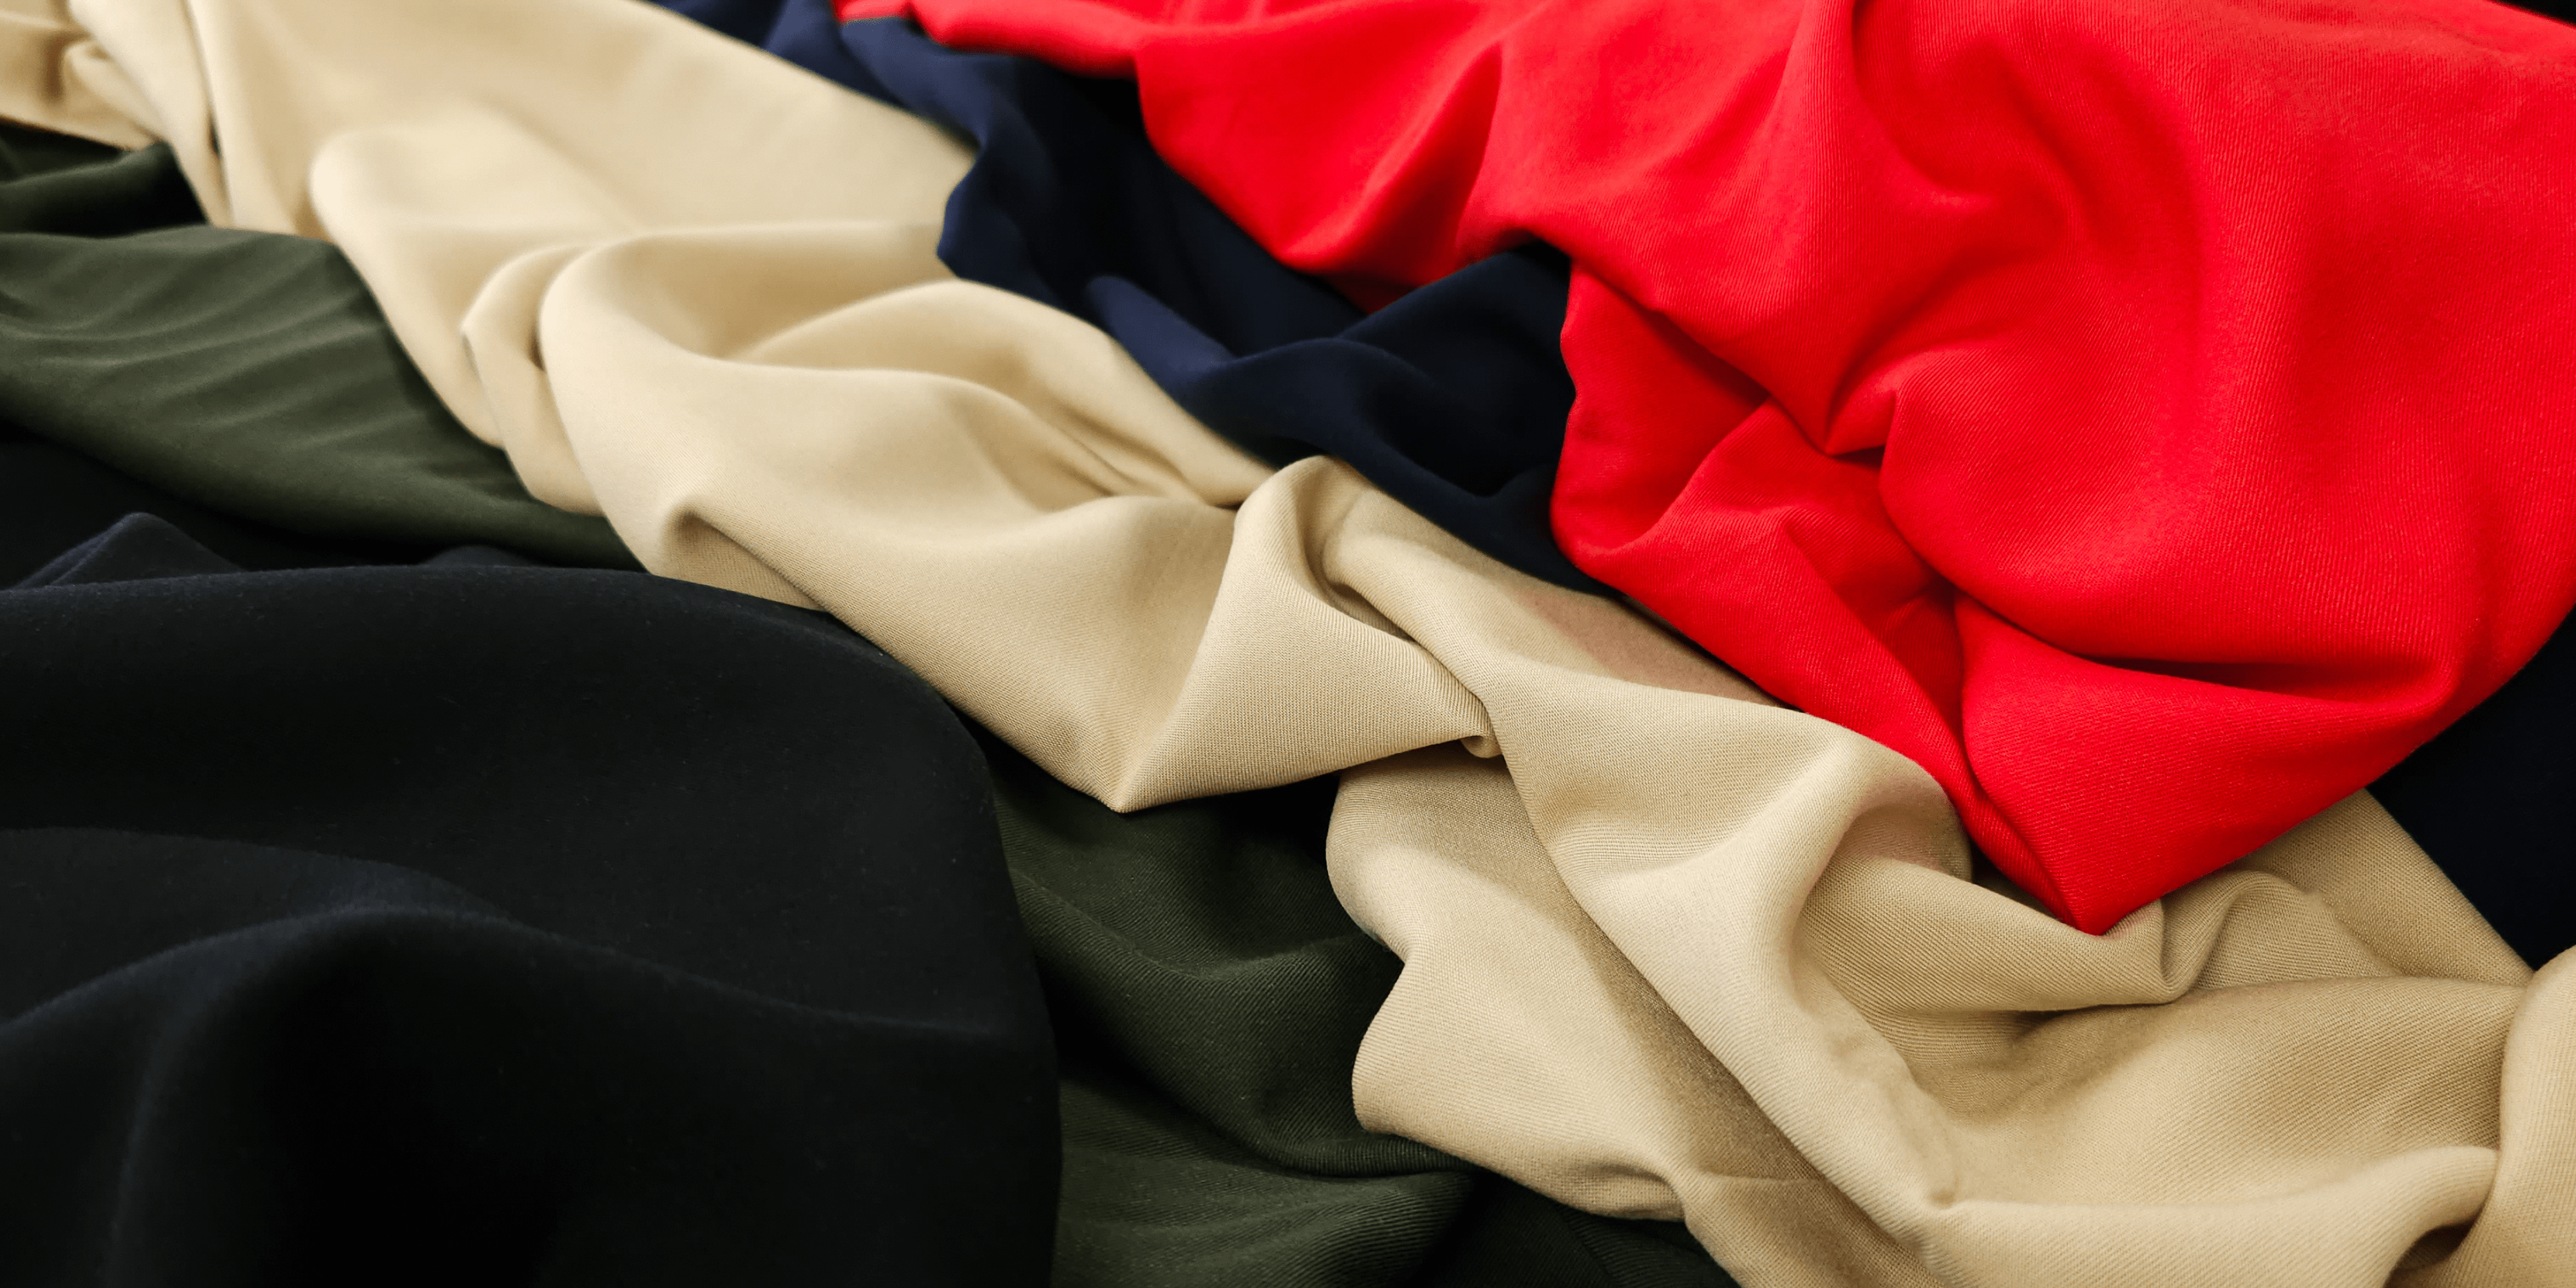 Brushed Cotton Twill - Ash Marle – The Fabric Store Online